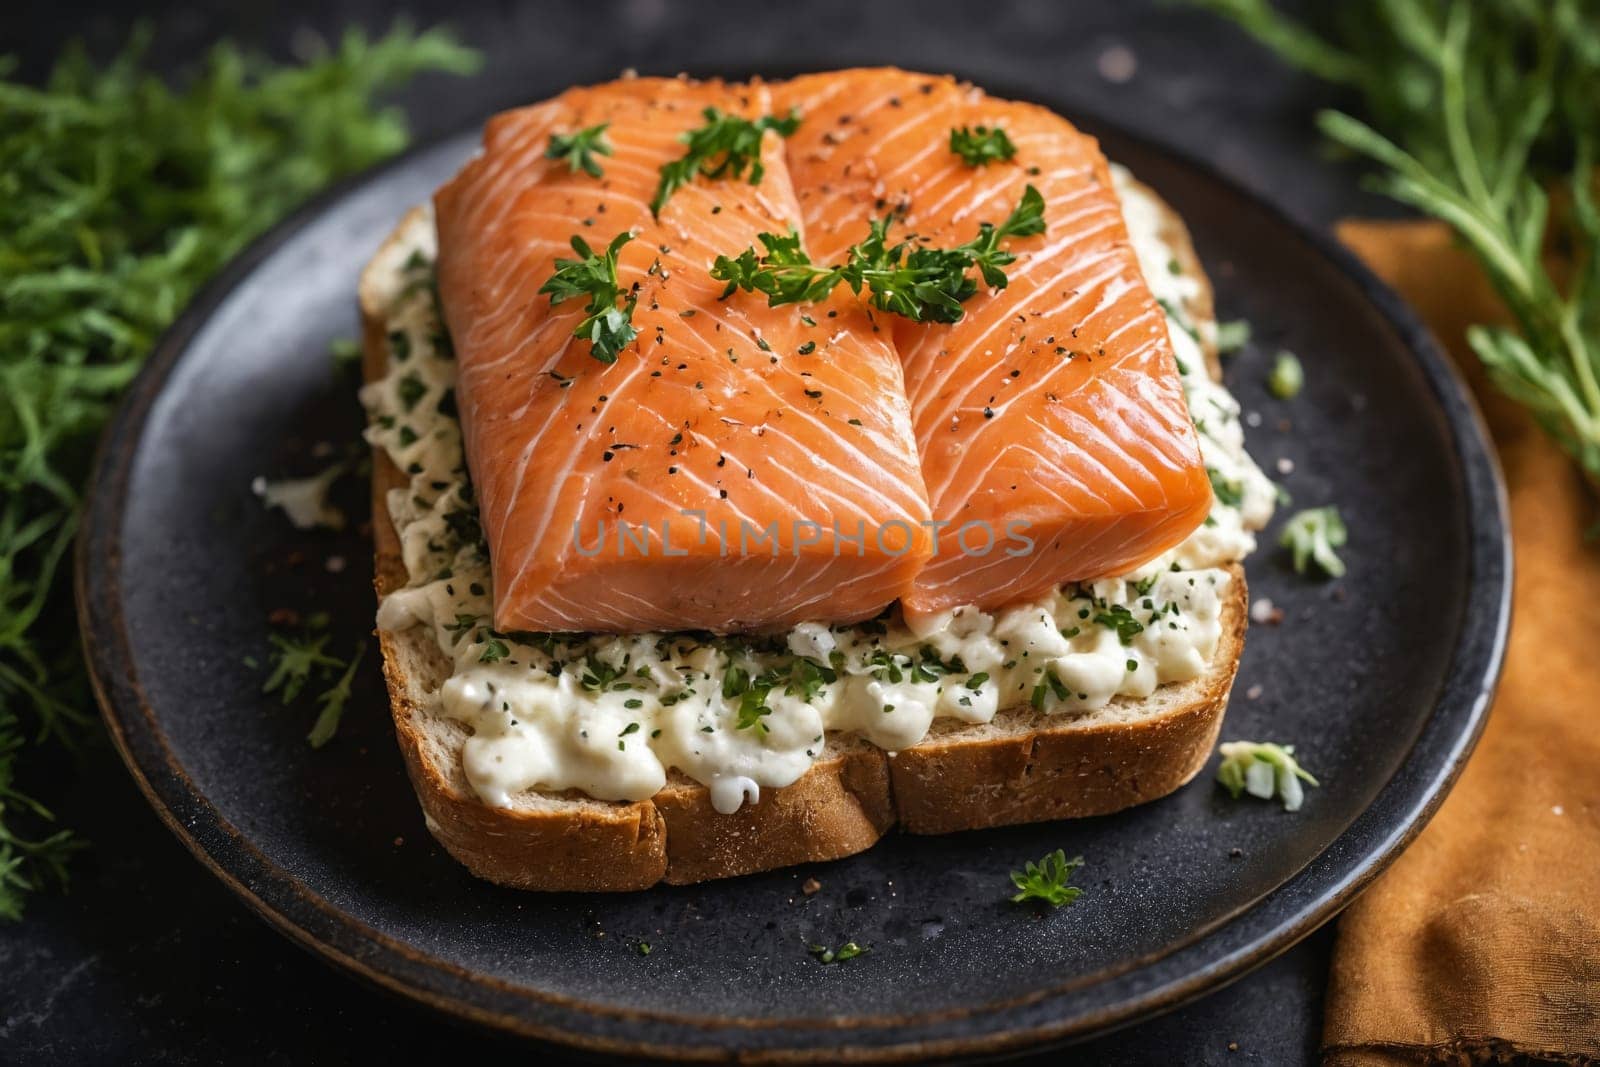 Fresh Herbed Cream Cheese and Smoked Salmon Delight by Andre1ns